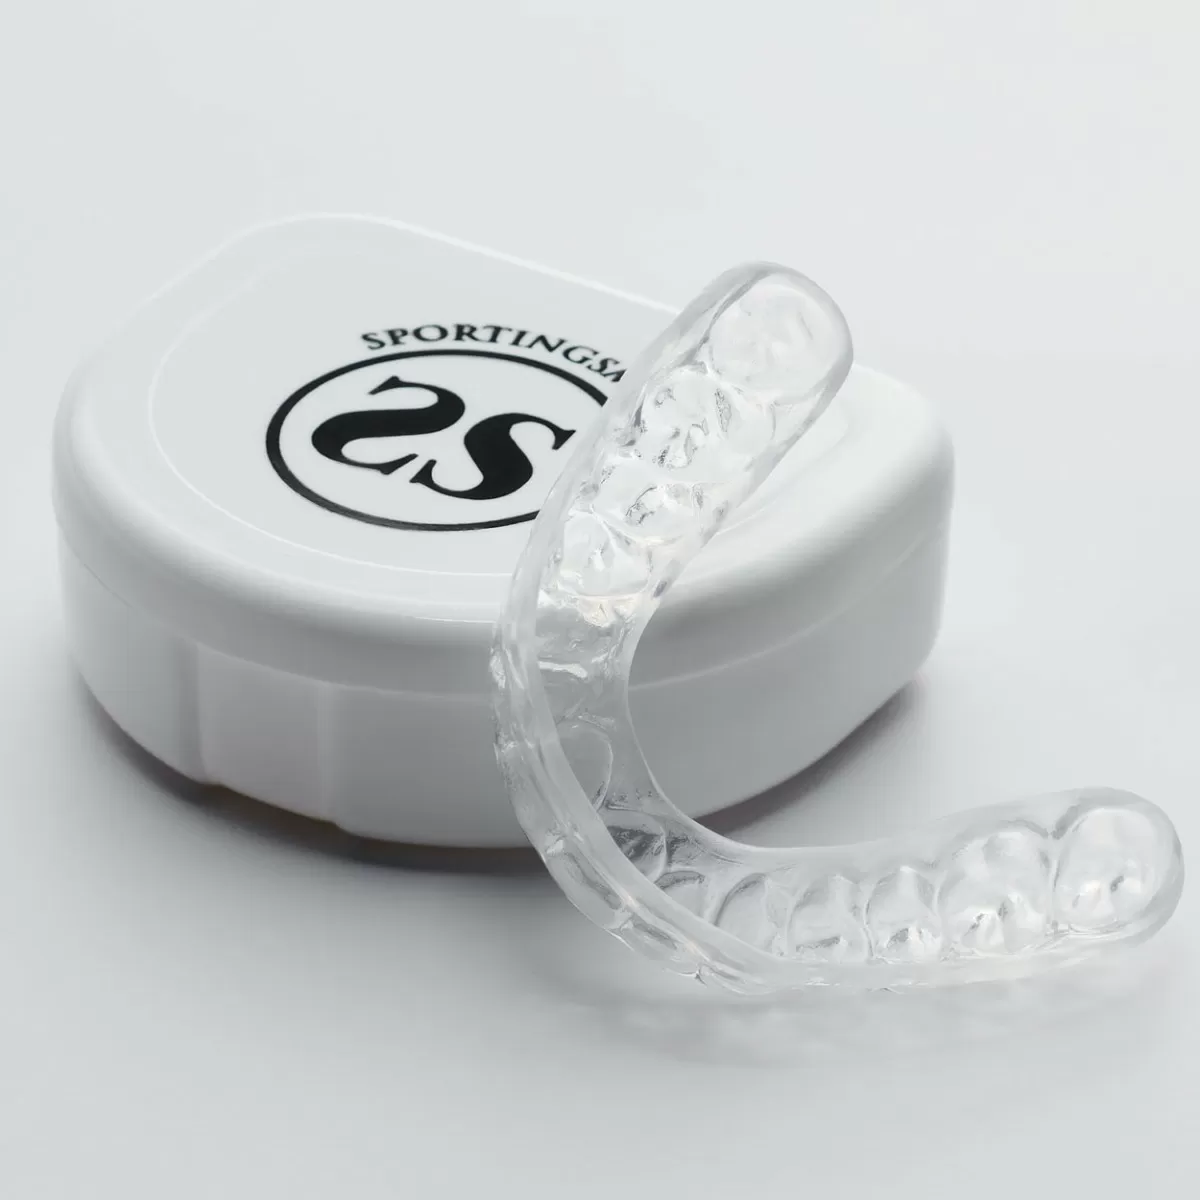 6mm_mouthguard_1_-cropped